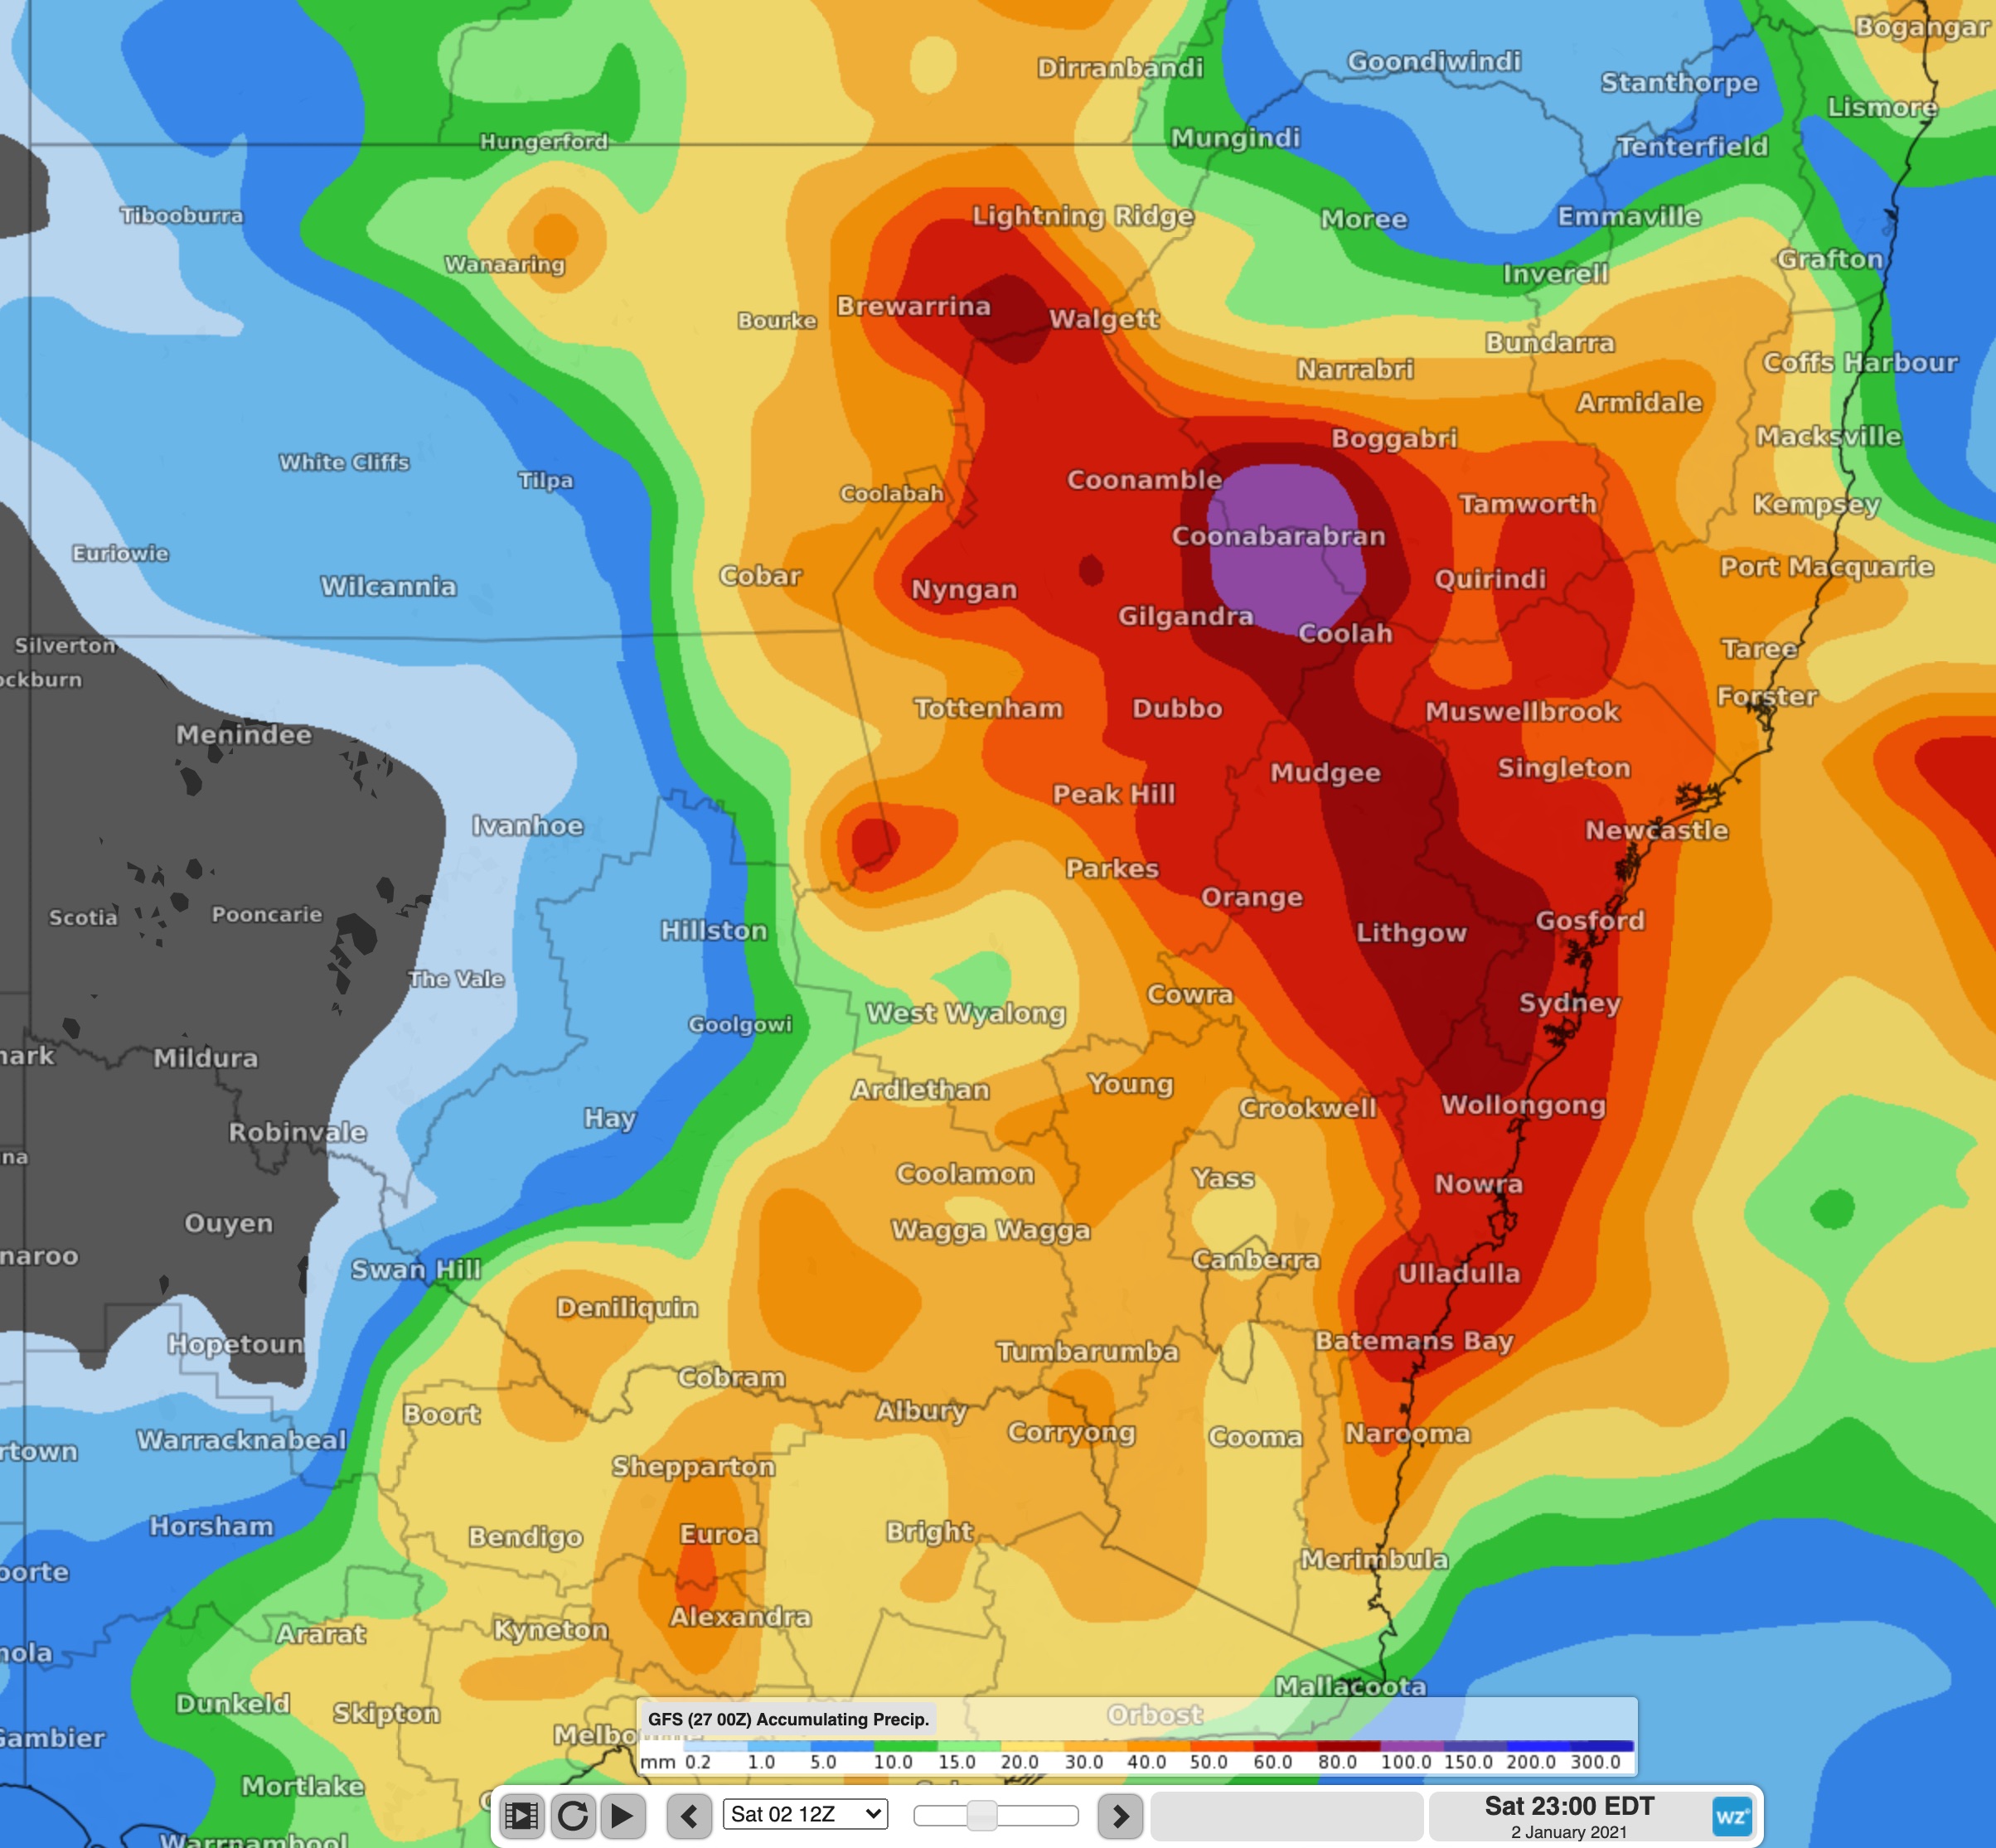 A severe, stormy week ahead for NSW